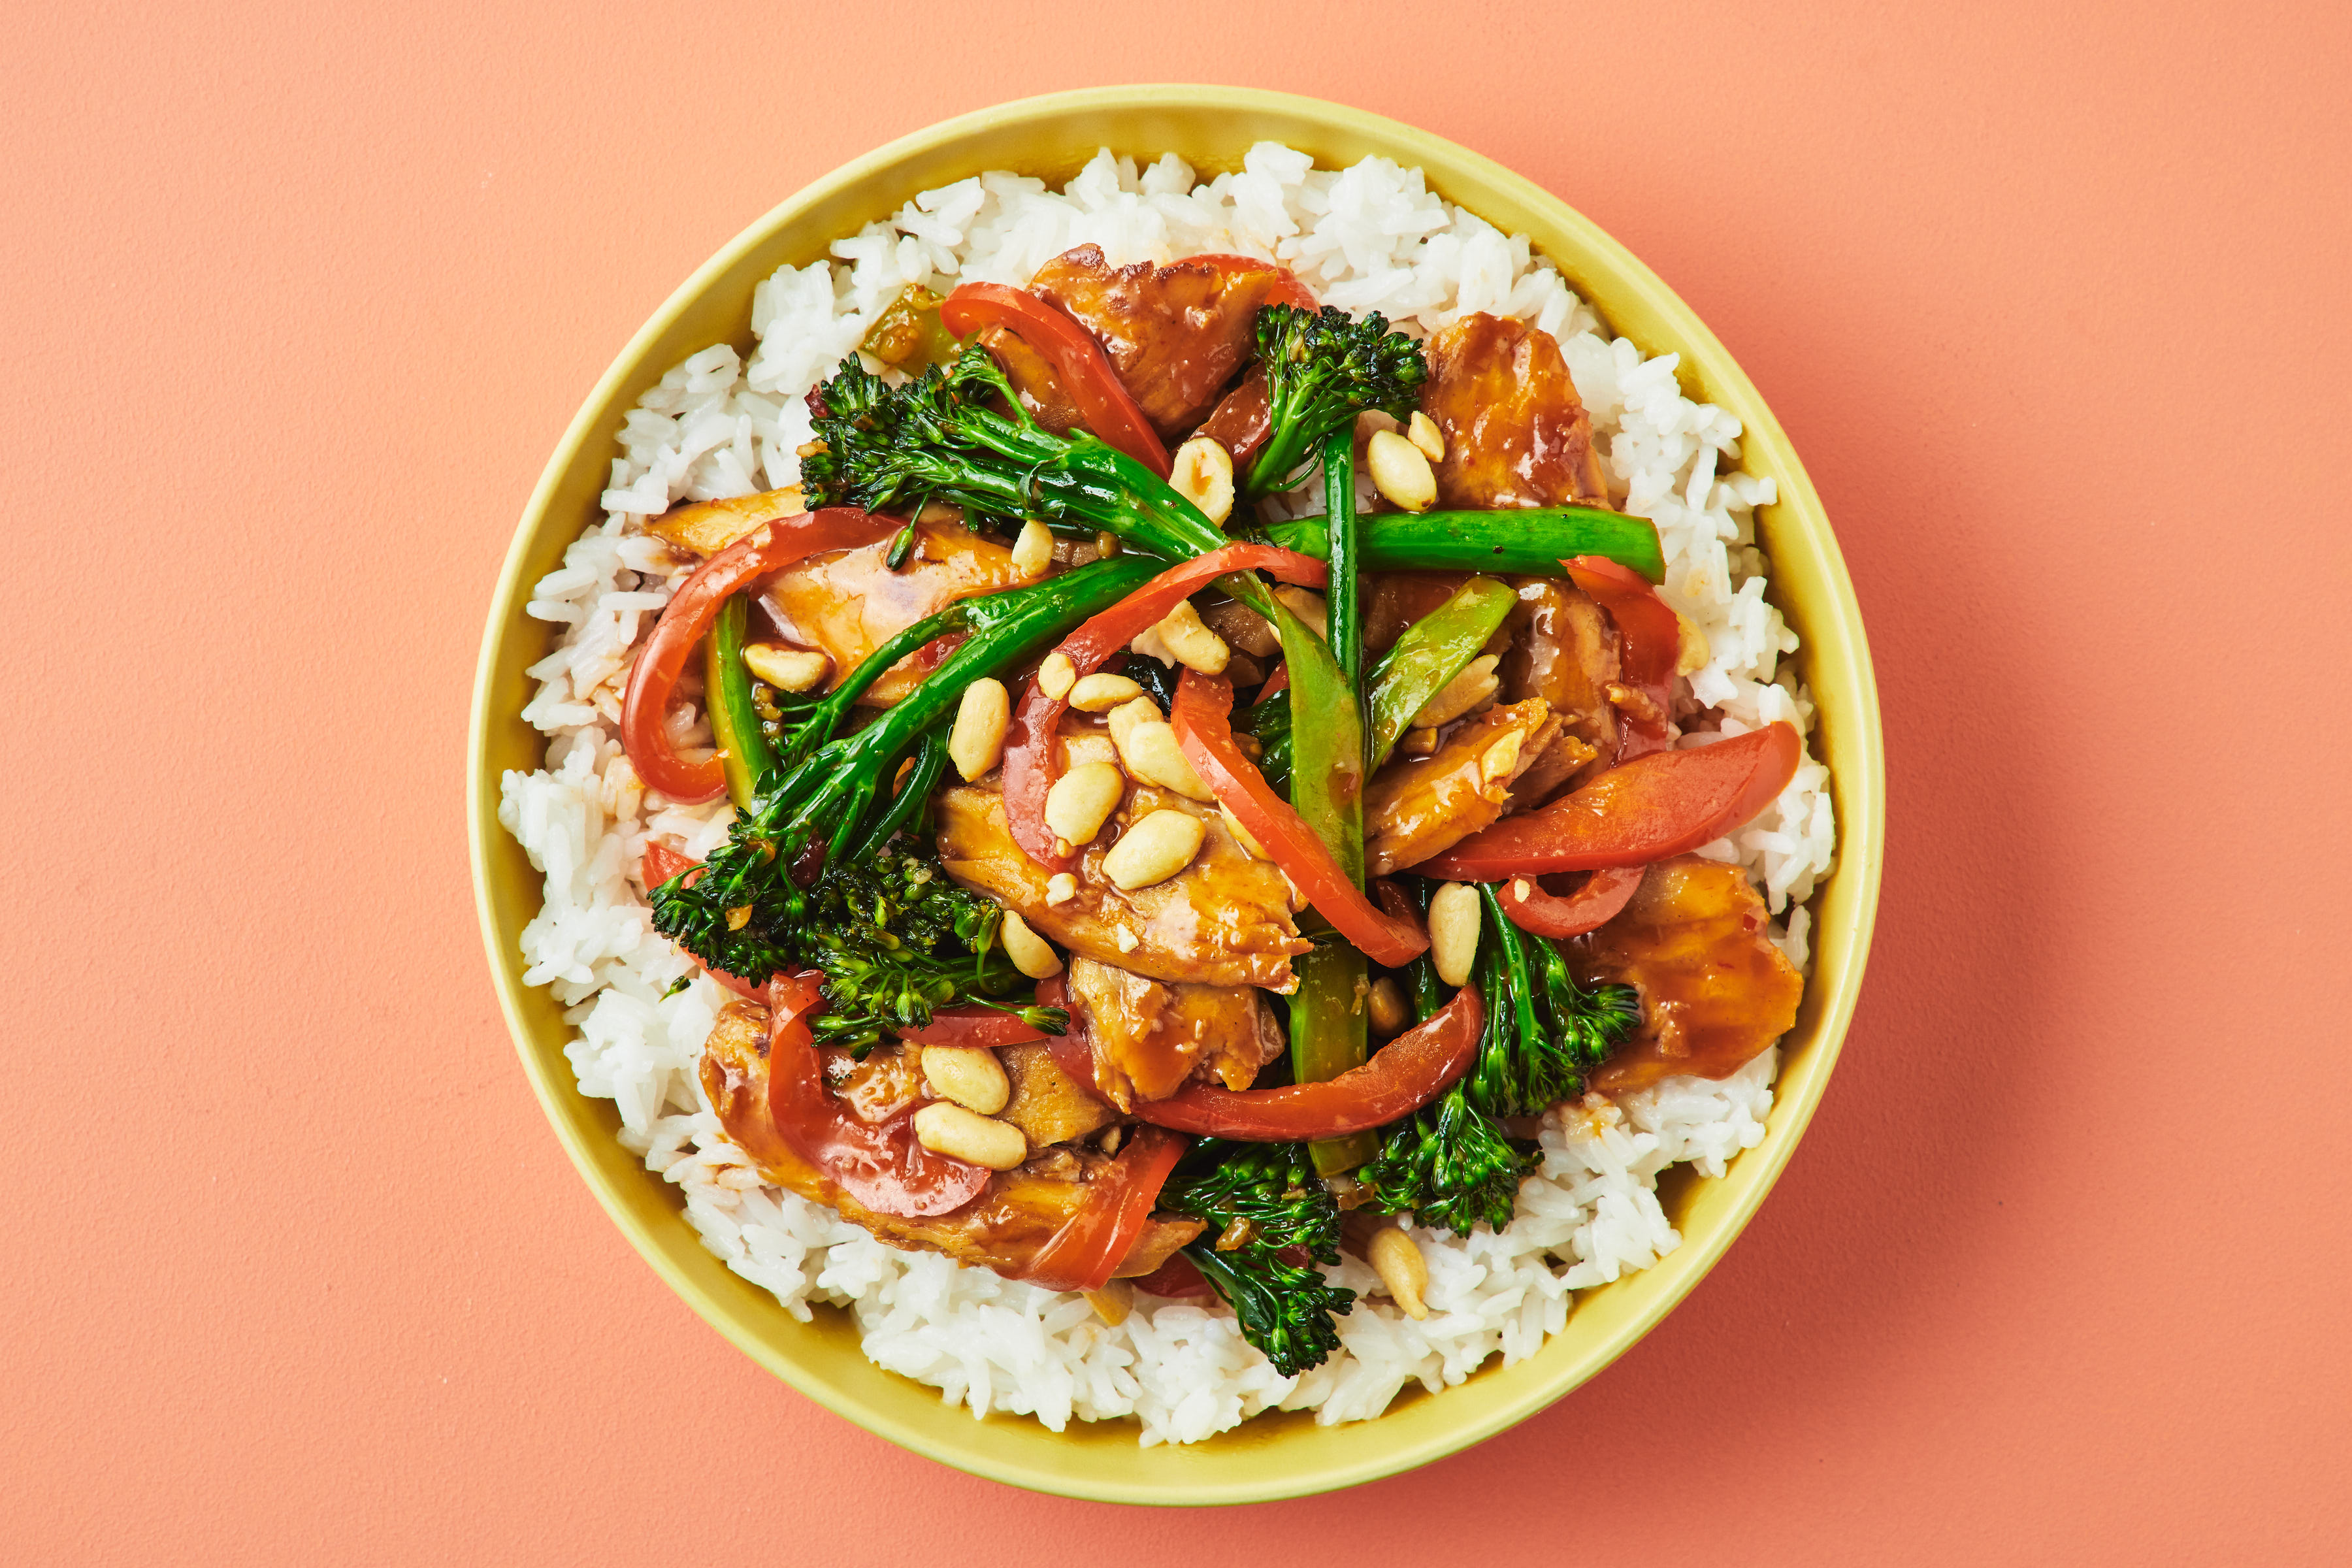 Chinese Plant-Based 'Chicken' Stir-Fry with Broccolini and Rice